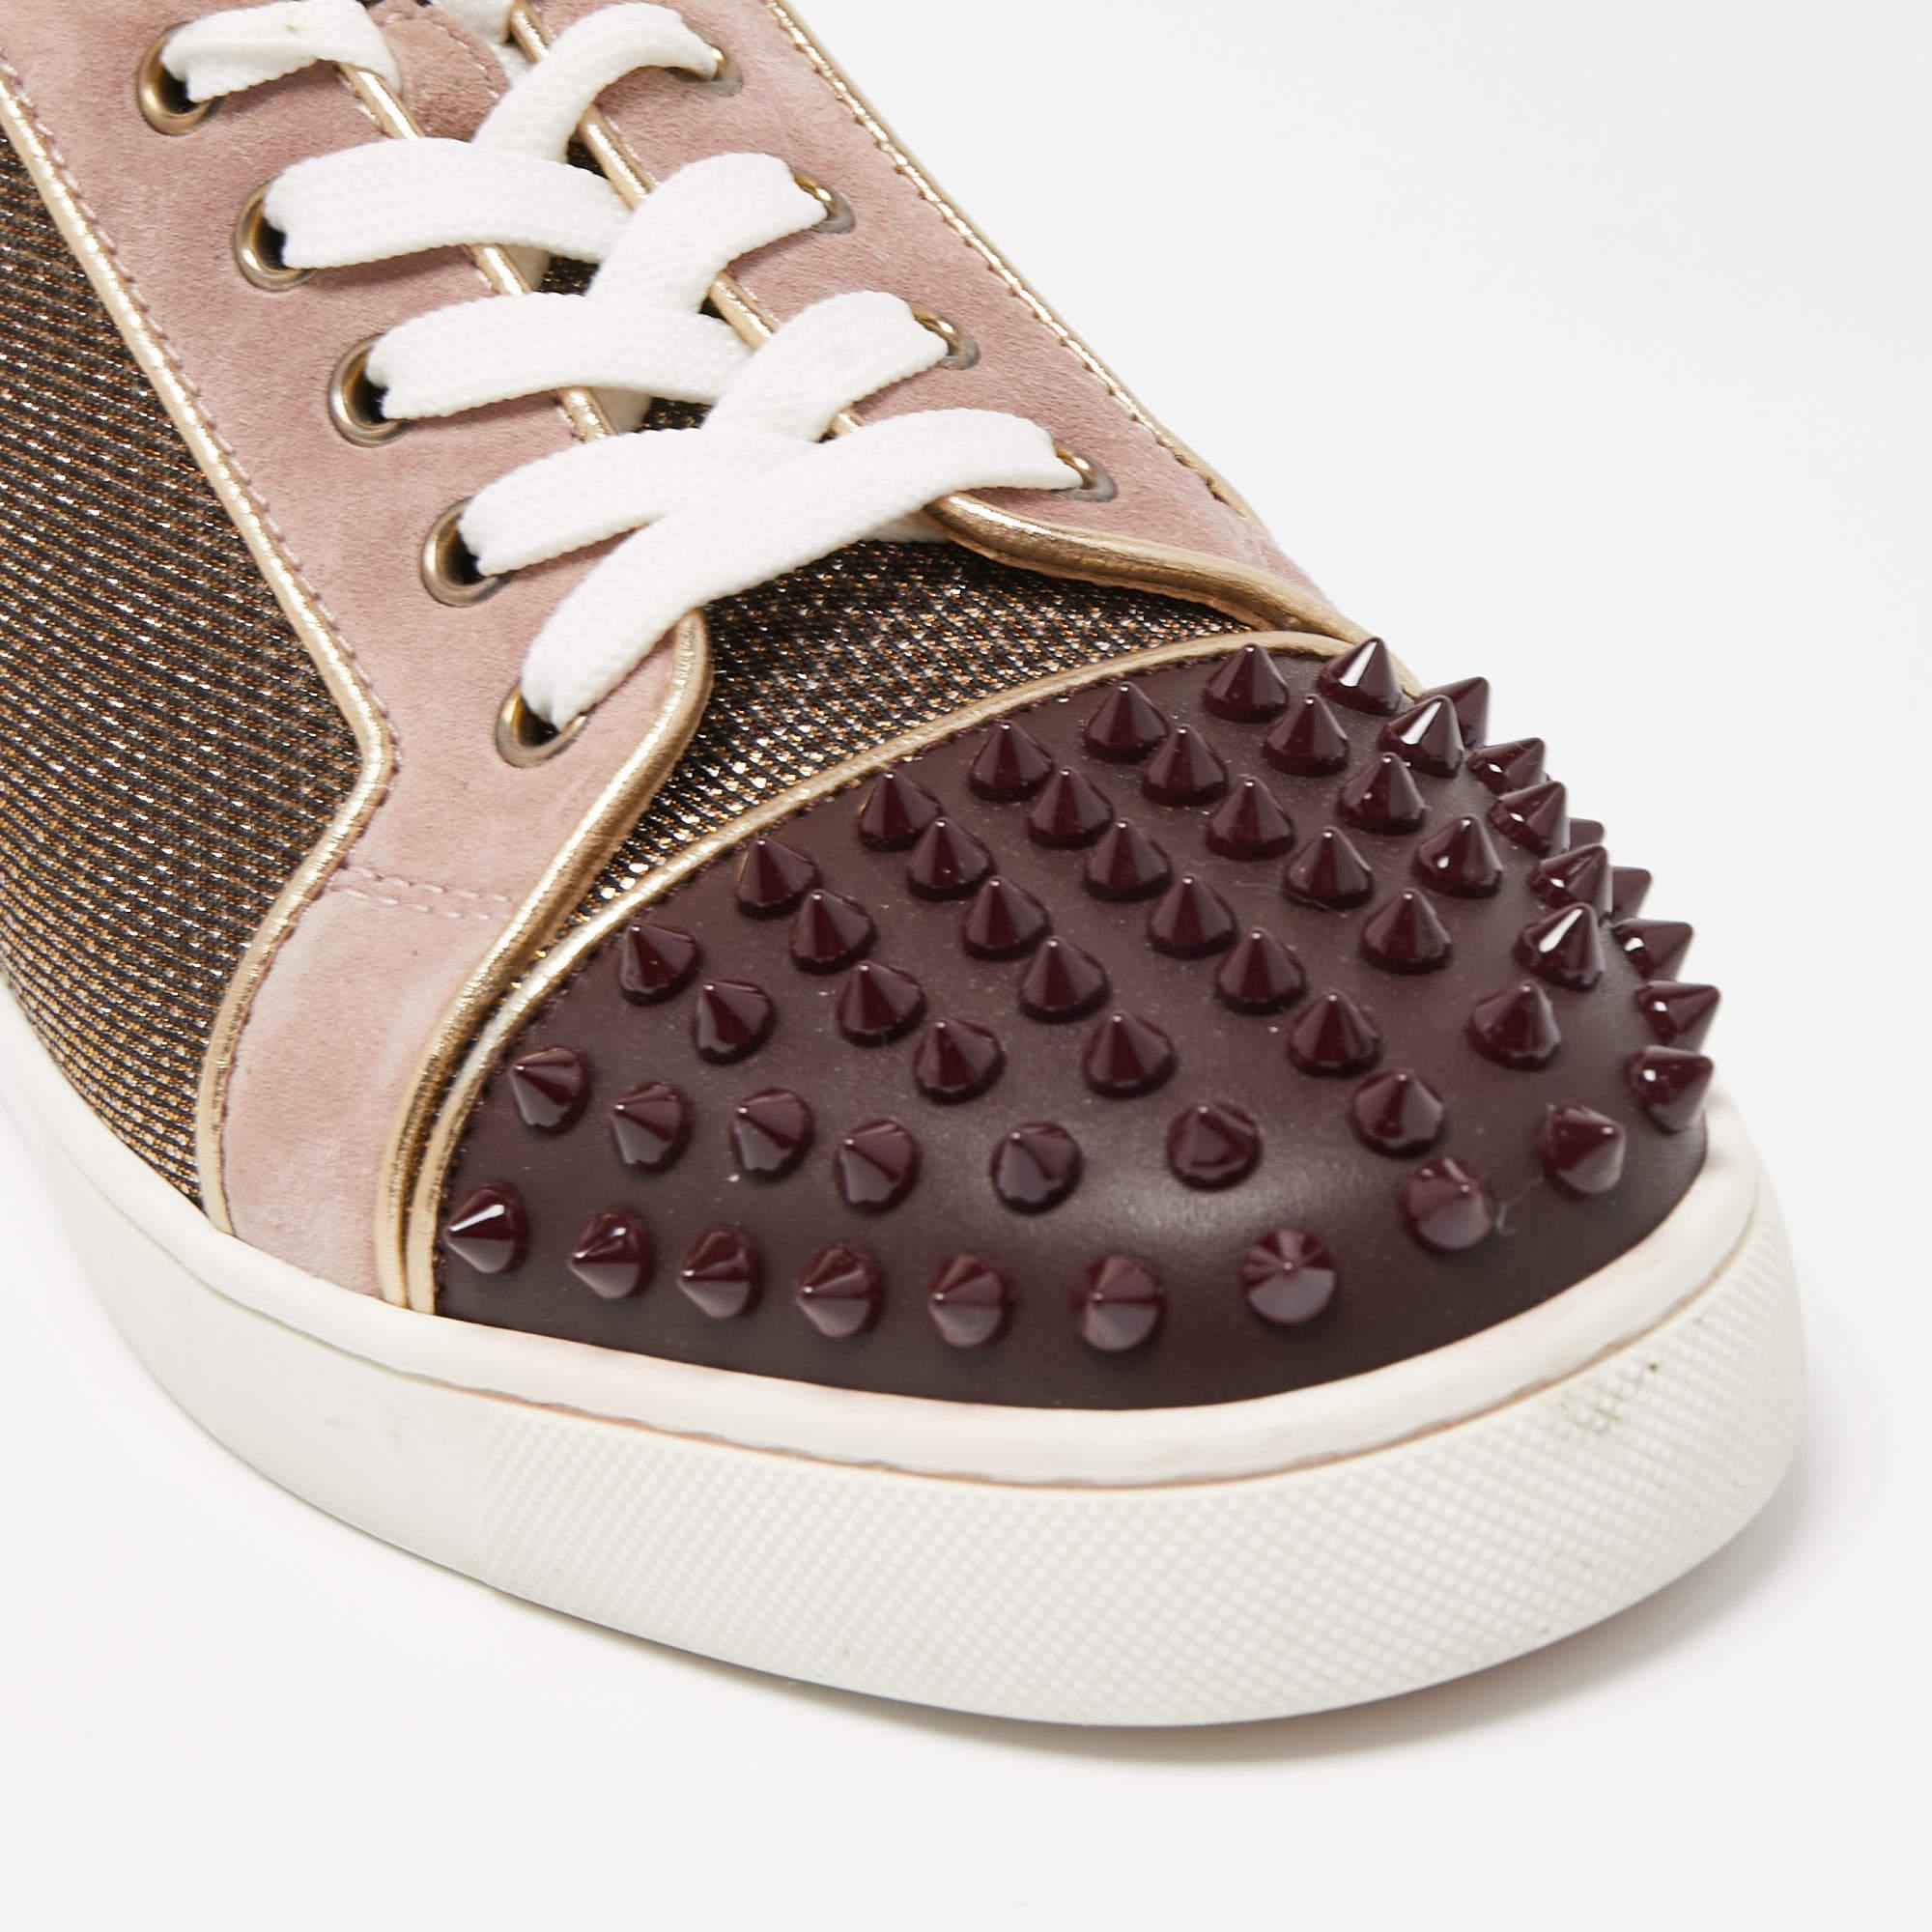 Like to cover your feet with style that speaks about your character? The Christian Louboutin Louis Junior Spikes sneakers are clearly made for you, then. The color, the design, and the embellishments will grab eyes for a certain, and your feet will